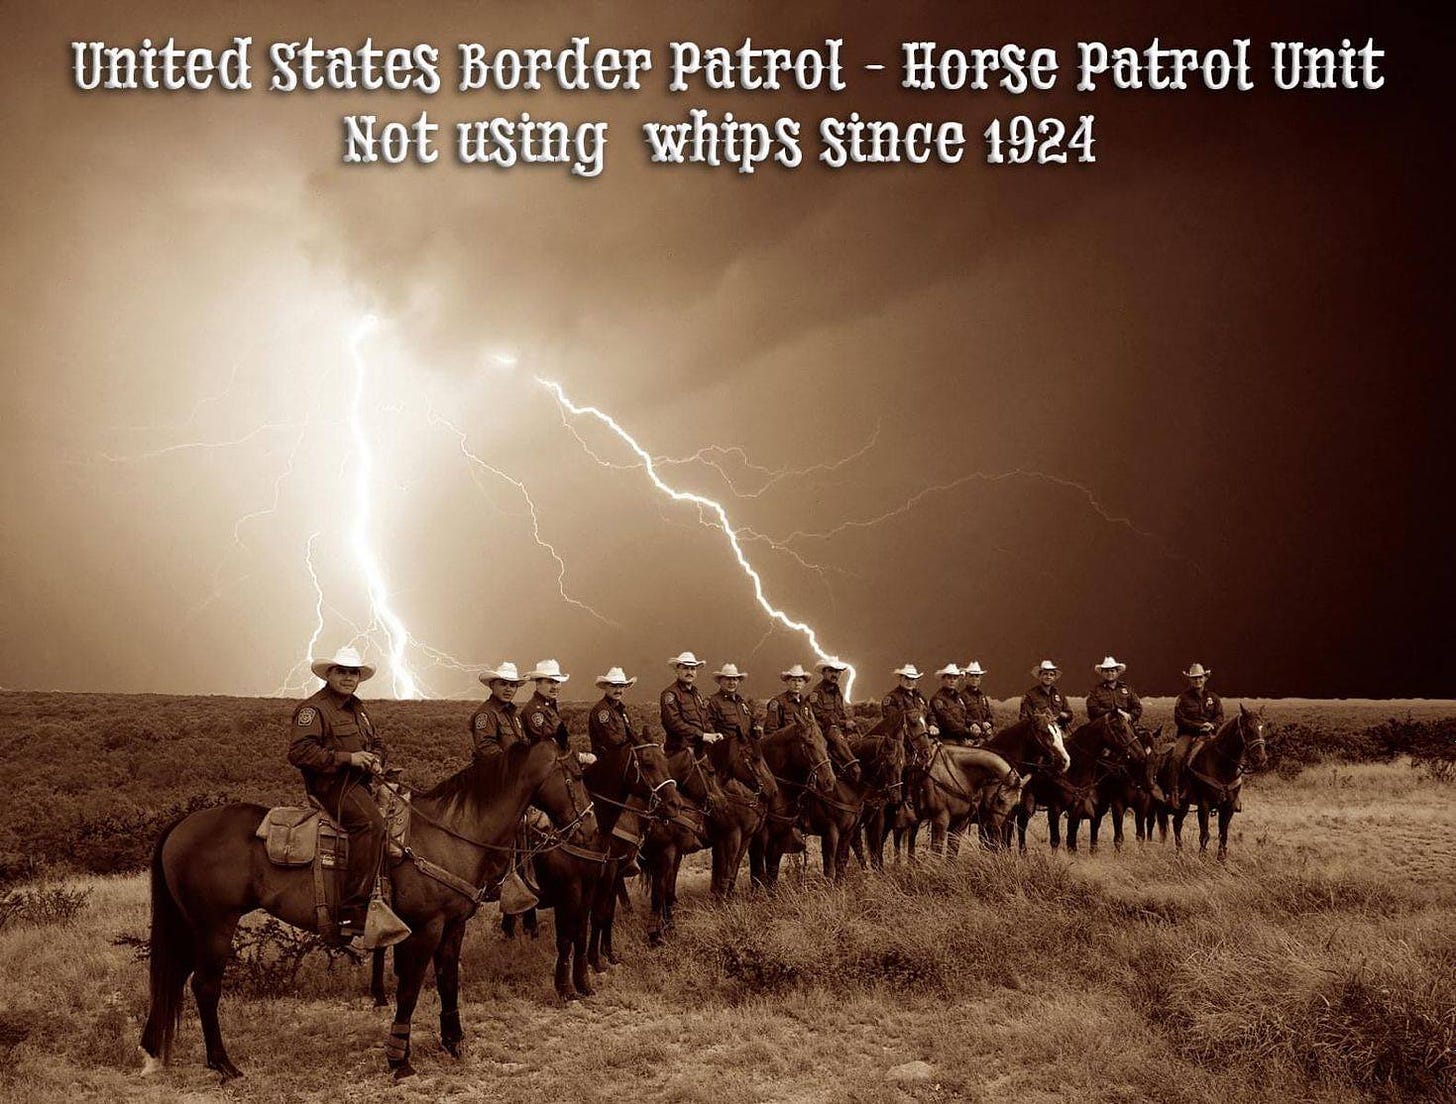 May be an image of text that says 'Untted states Border Patrol Horse Patroł Unit Not using whtps since 1924'